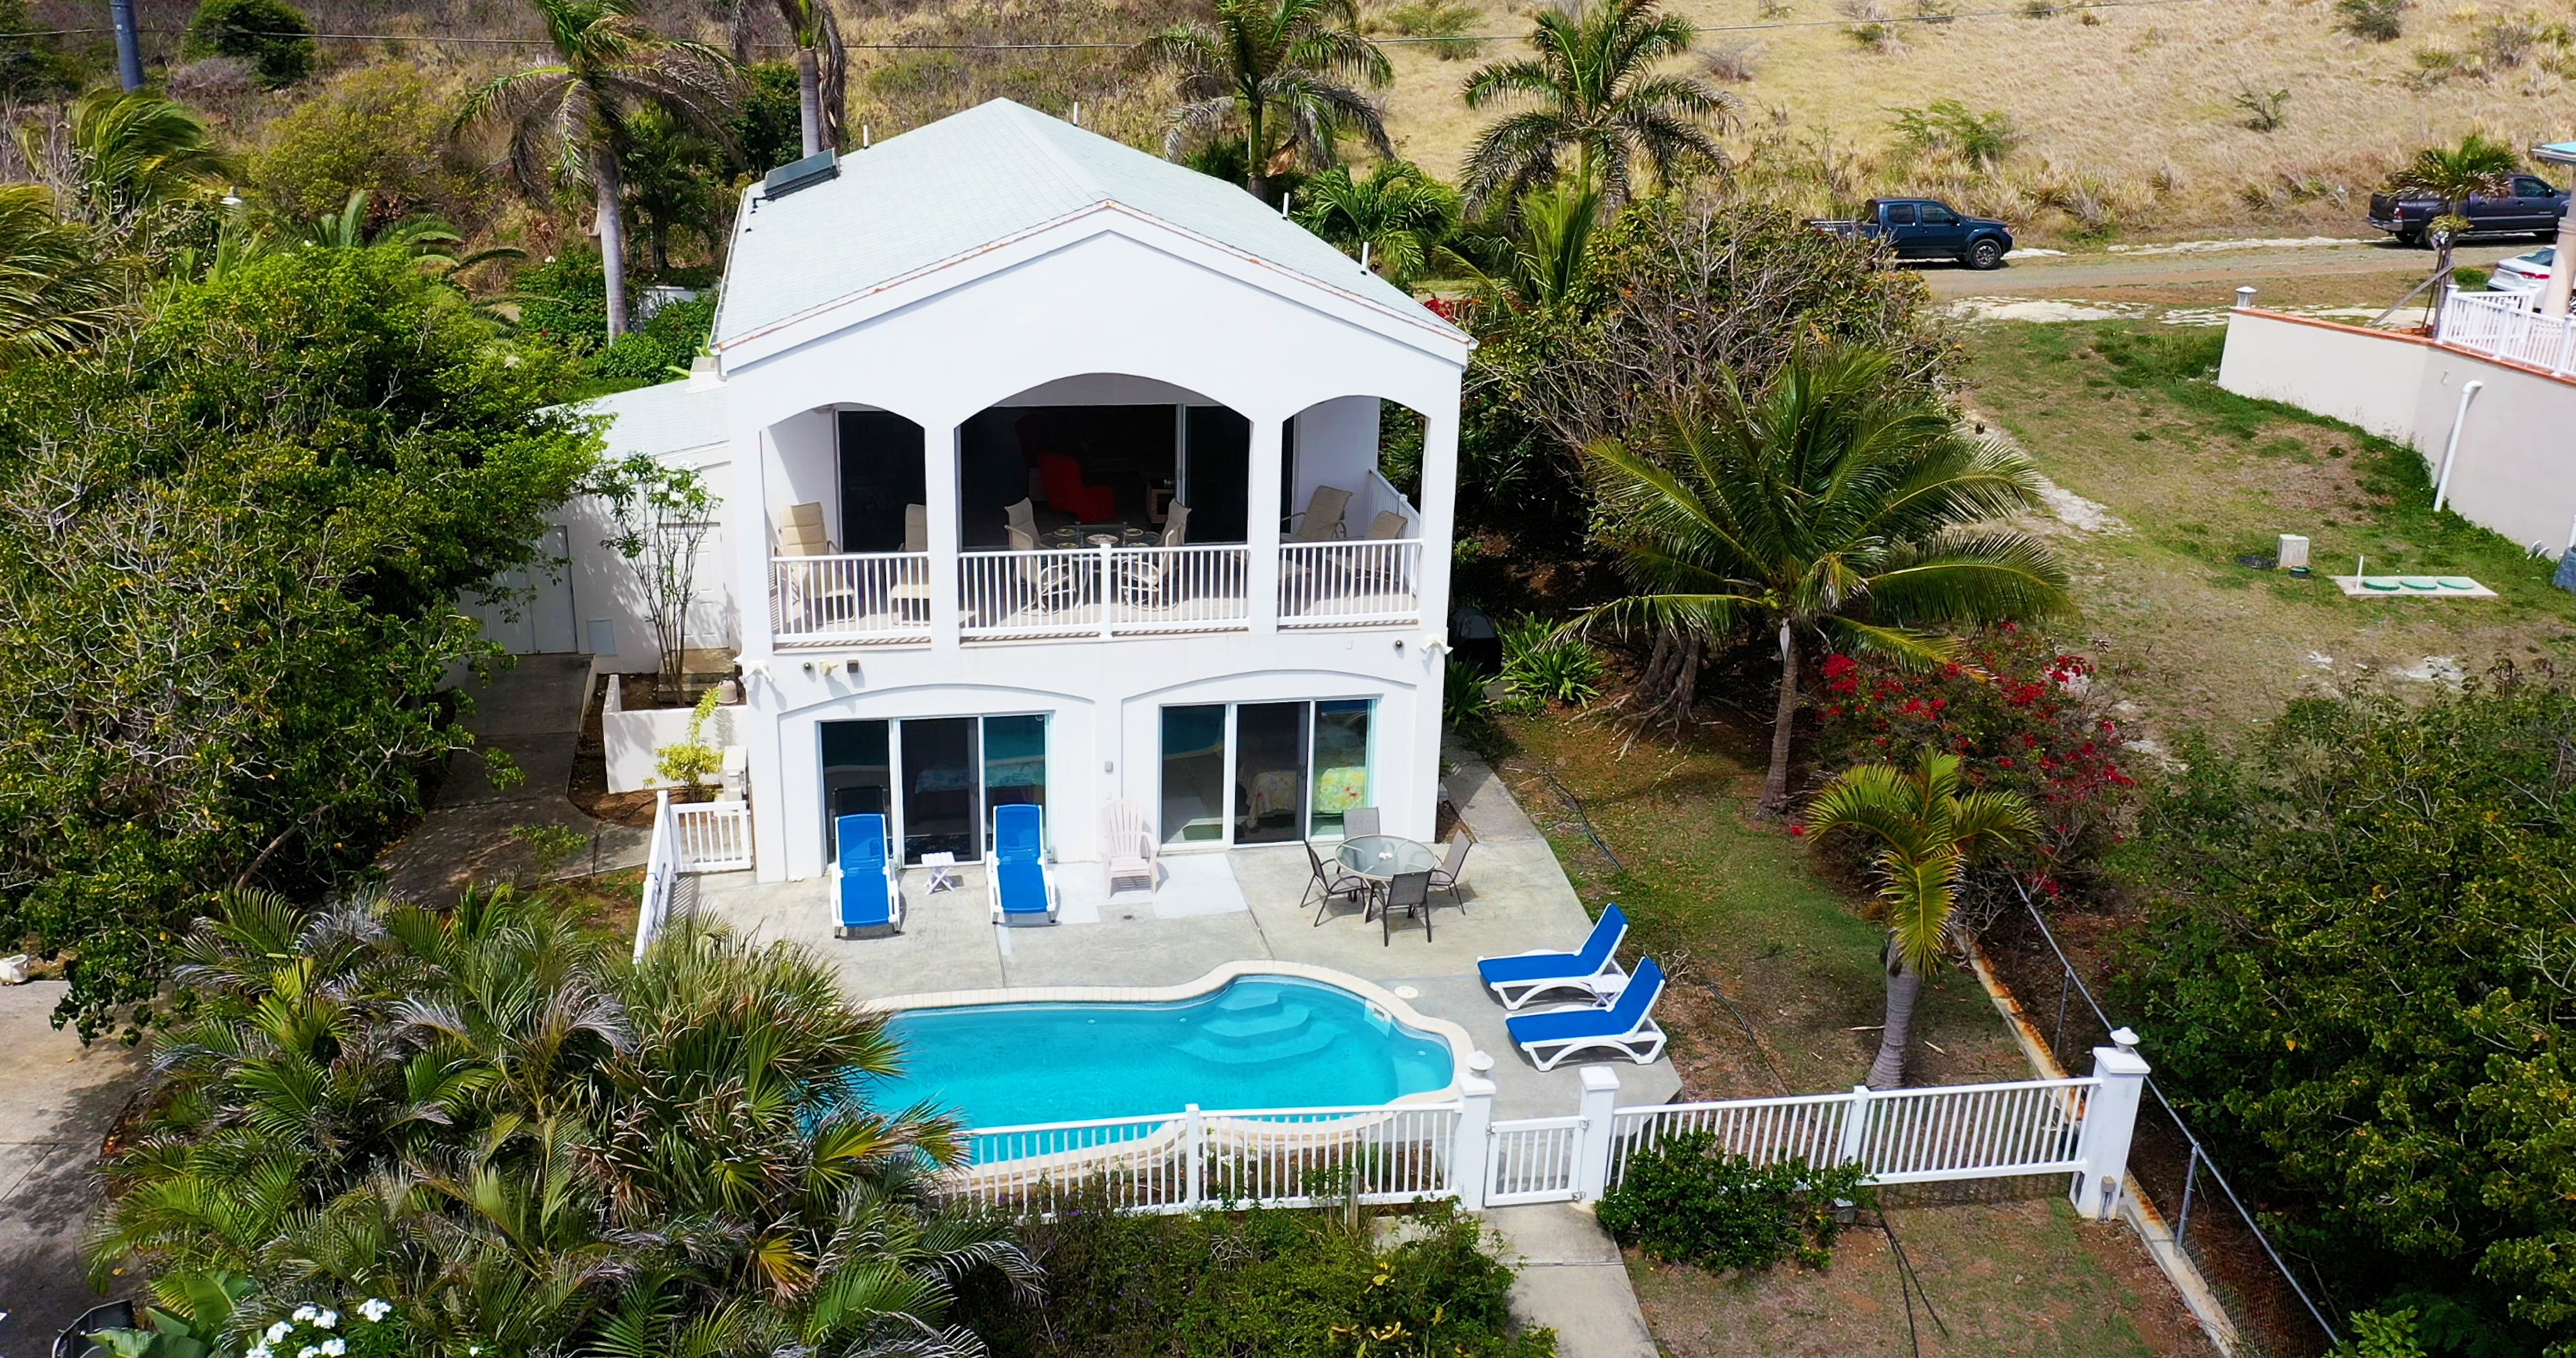 Property Image 1 - ​​​​​​​Hibiscus Beach House! 2 bedroom, 2.5 bath, take 30 steps to your private beach